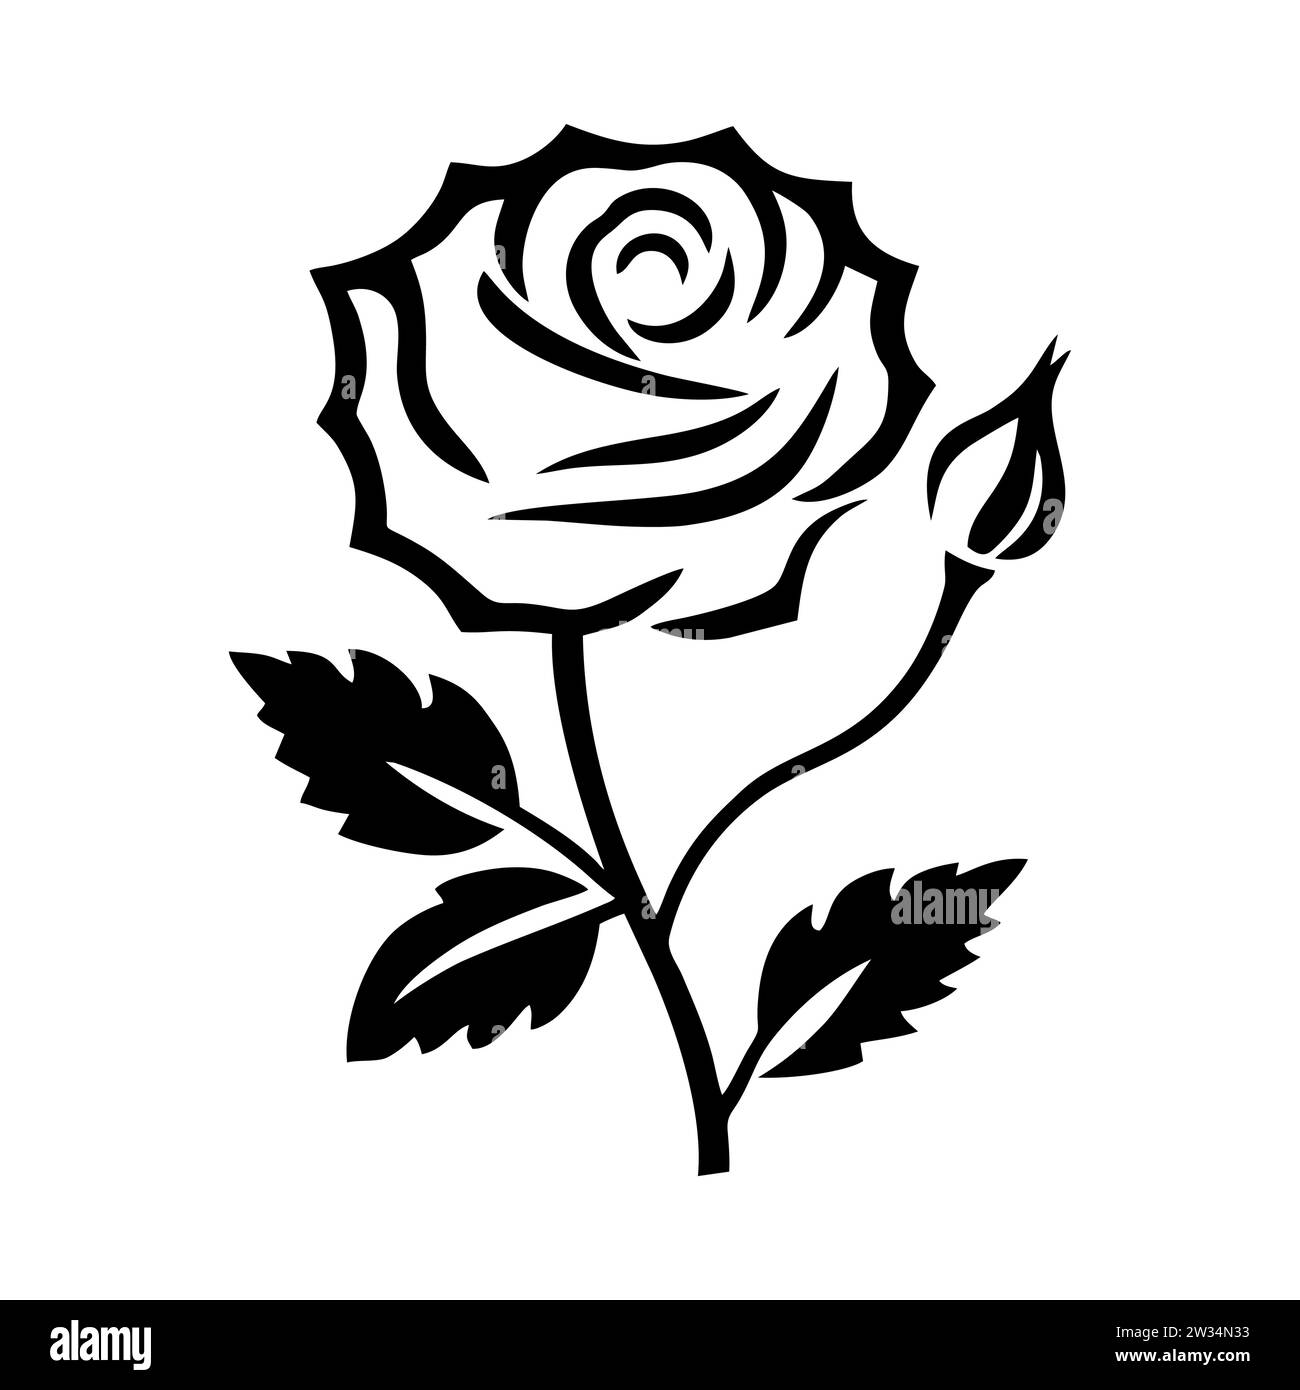 Rose icon. Decorative flower silhouette isolated on white background ...